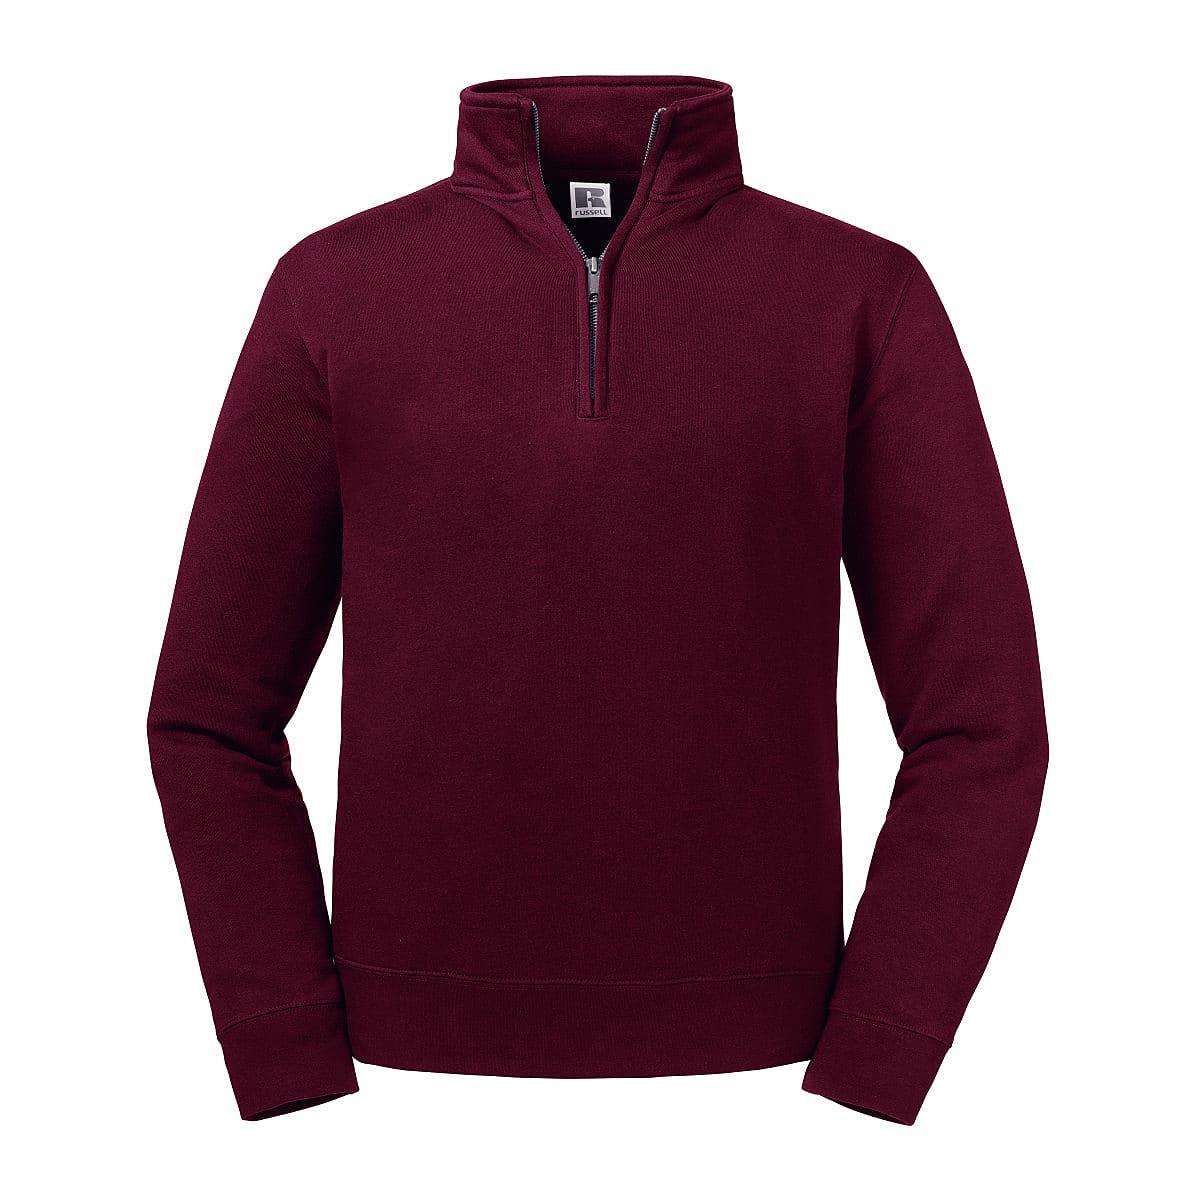 Russell Authentic 1/4 Zip Sweater in Burgundy (Product Code: R270M)